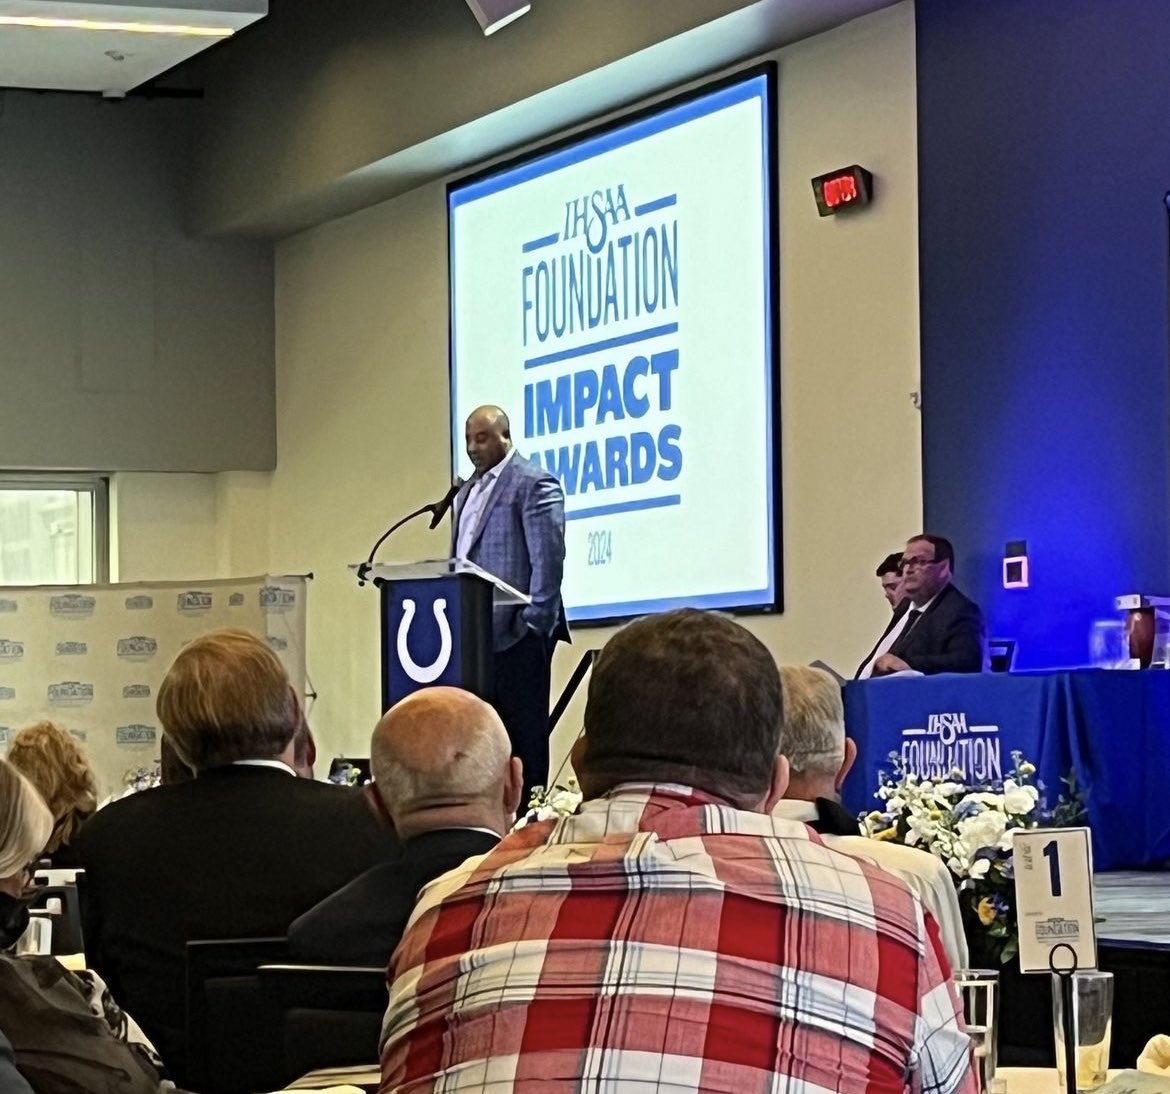 The @HoopsHall was honored to have been a table sponsor for the inaugural @IHSAAFoundation Impact Awards last night. We are proud to support the IHSAA Foundation in their mission to honor and recognize the achievements of student-athletes on the field, in the classroom, and